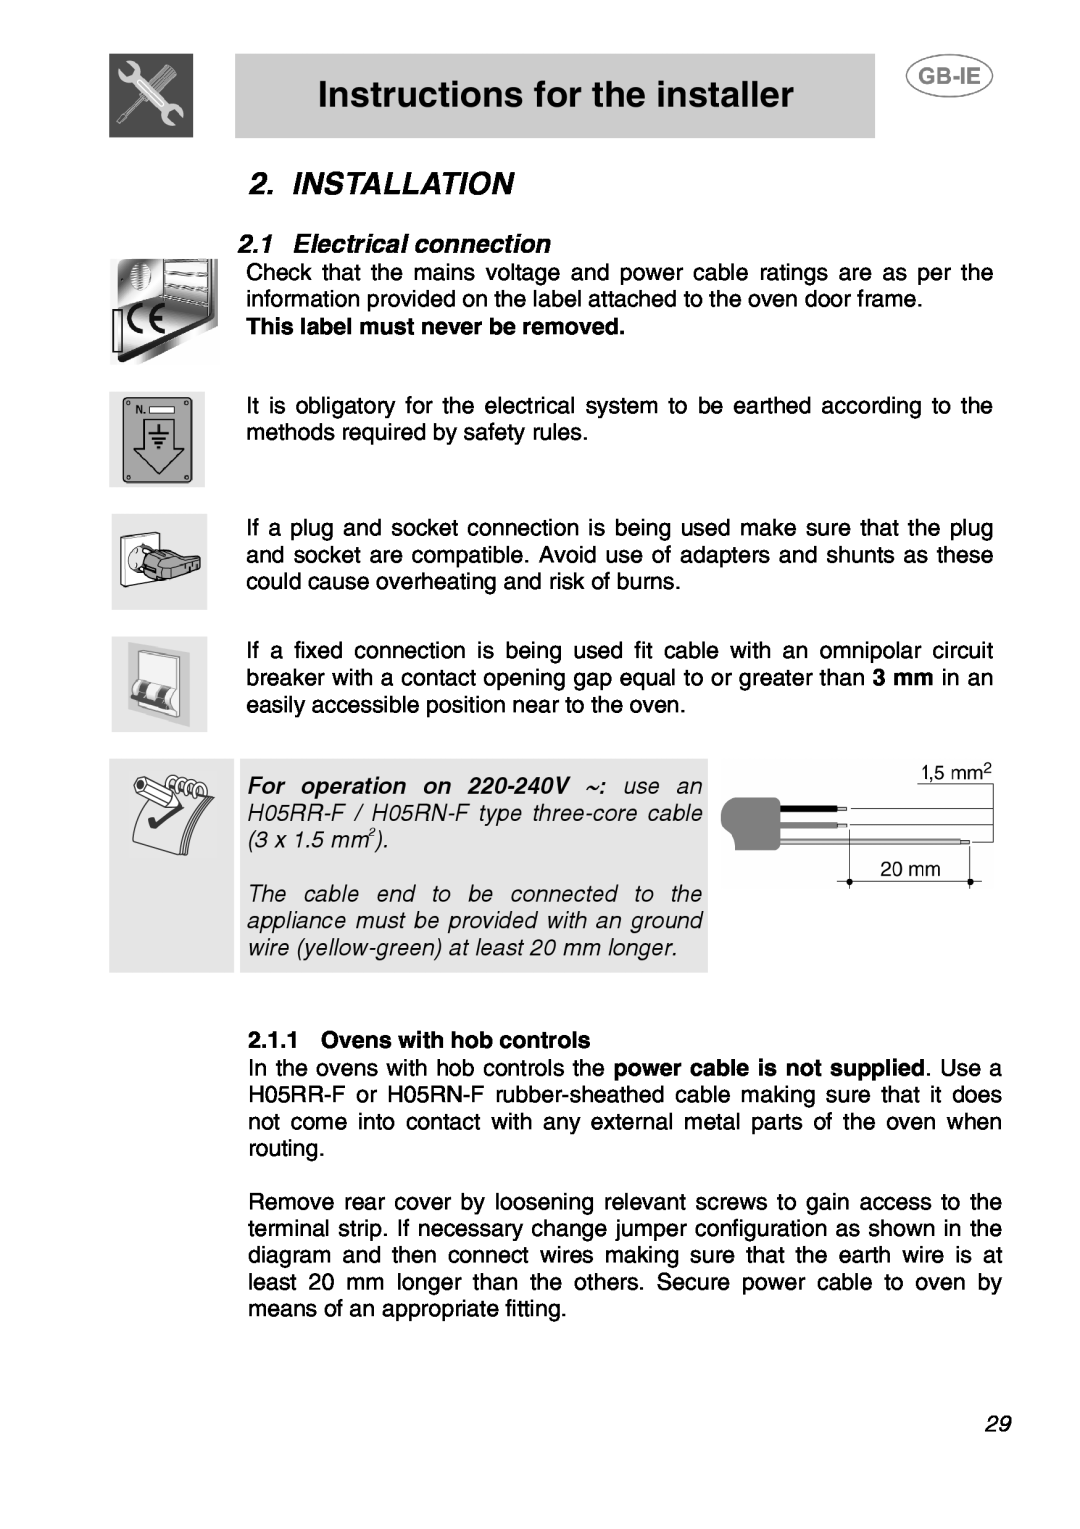 Smeg SA240X-5 manual Instructions for the installer, Installation, Electrical connection, This label must never be removed 